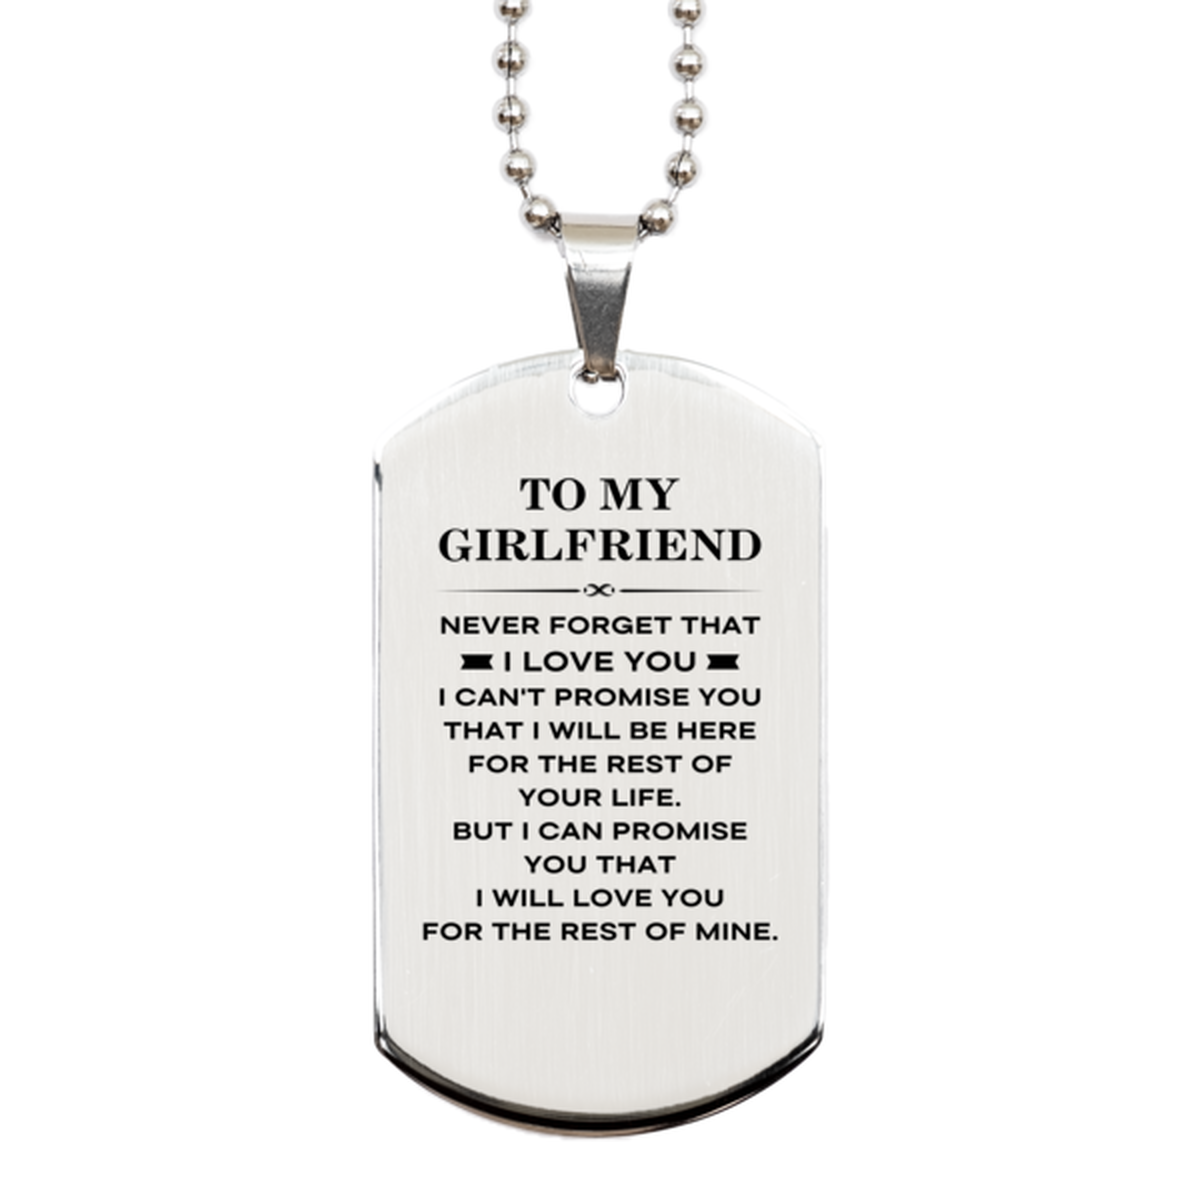 To My Girlfriend Gifts, I will love you for the rest of mine, Love Girlfriend Dog Tag Necklace, Birthday Christmas Unique Silver Dog Tag For Girlfriend